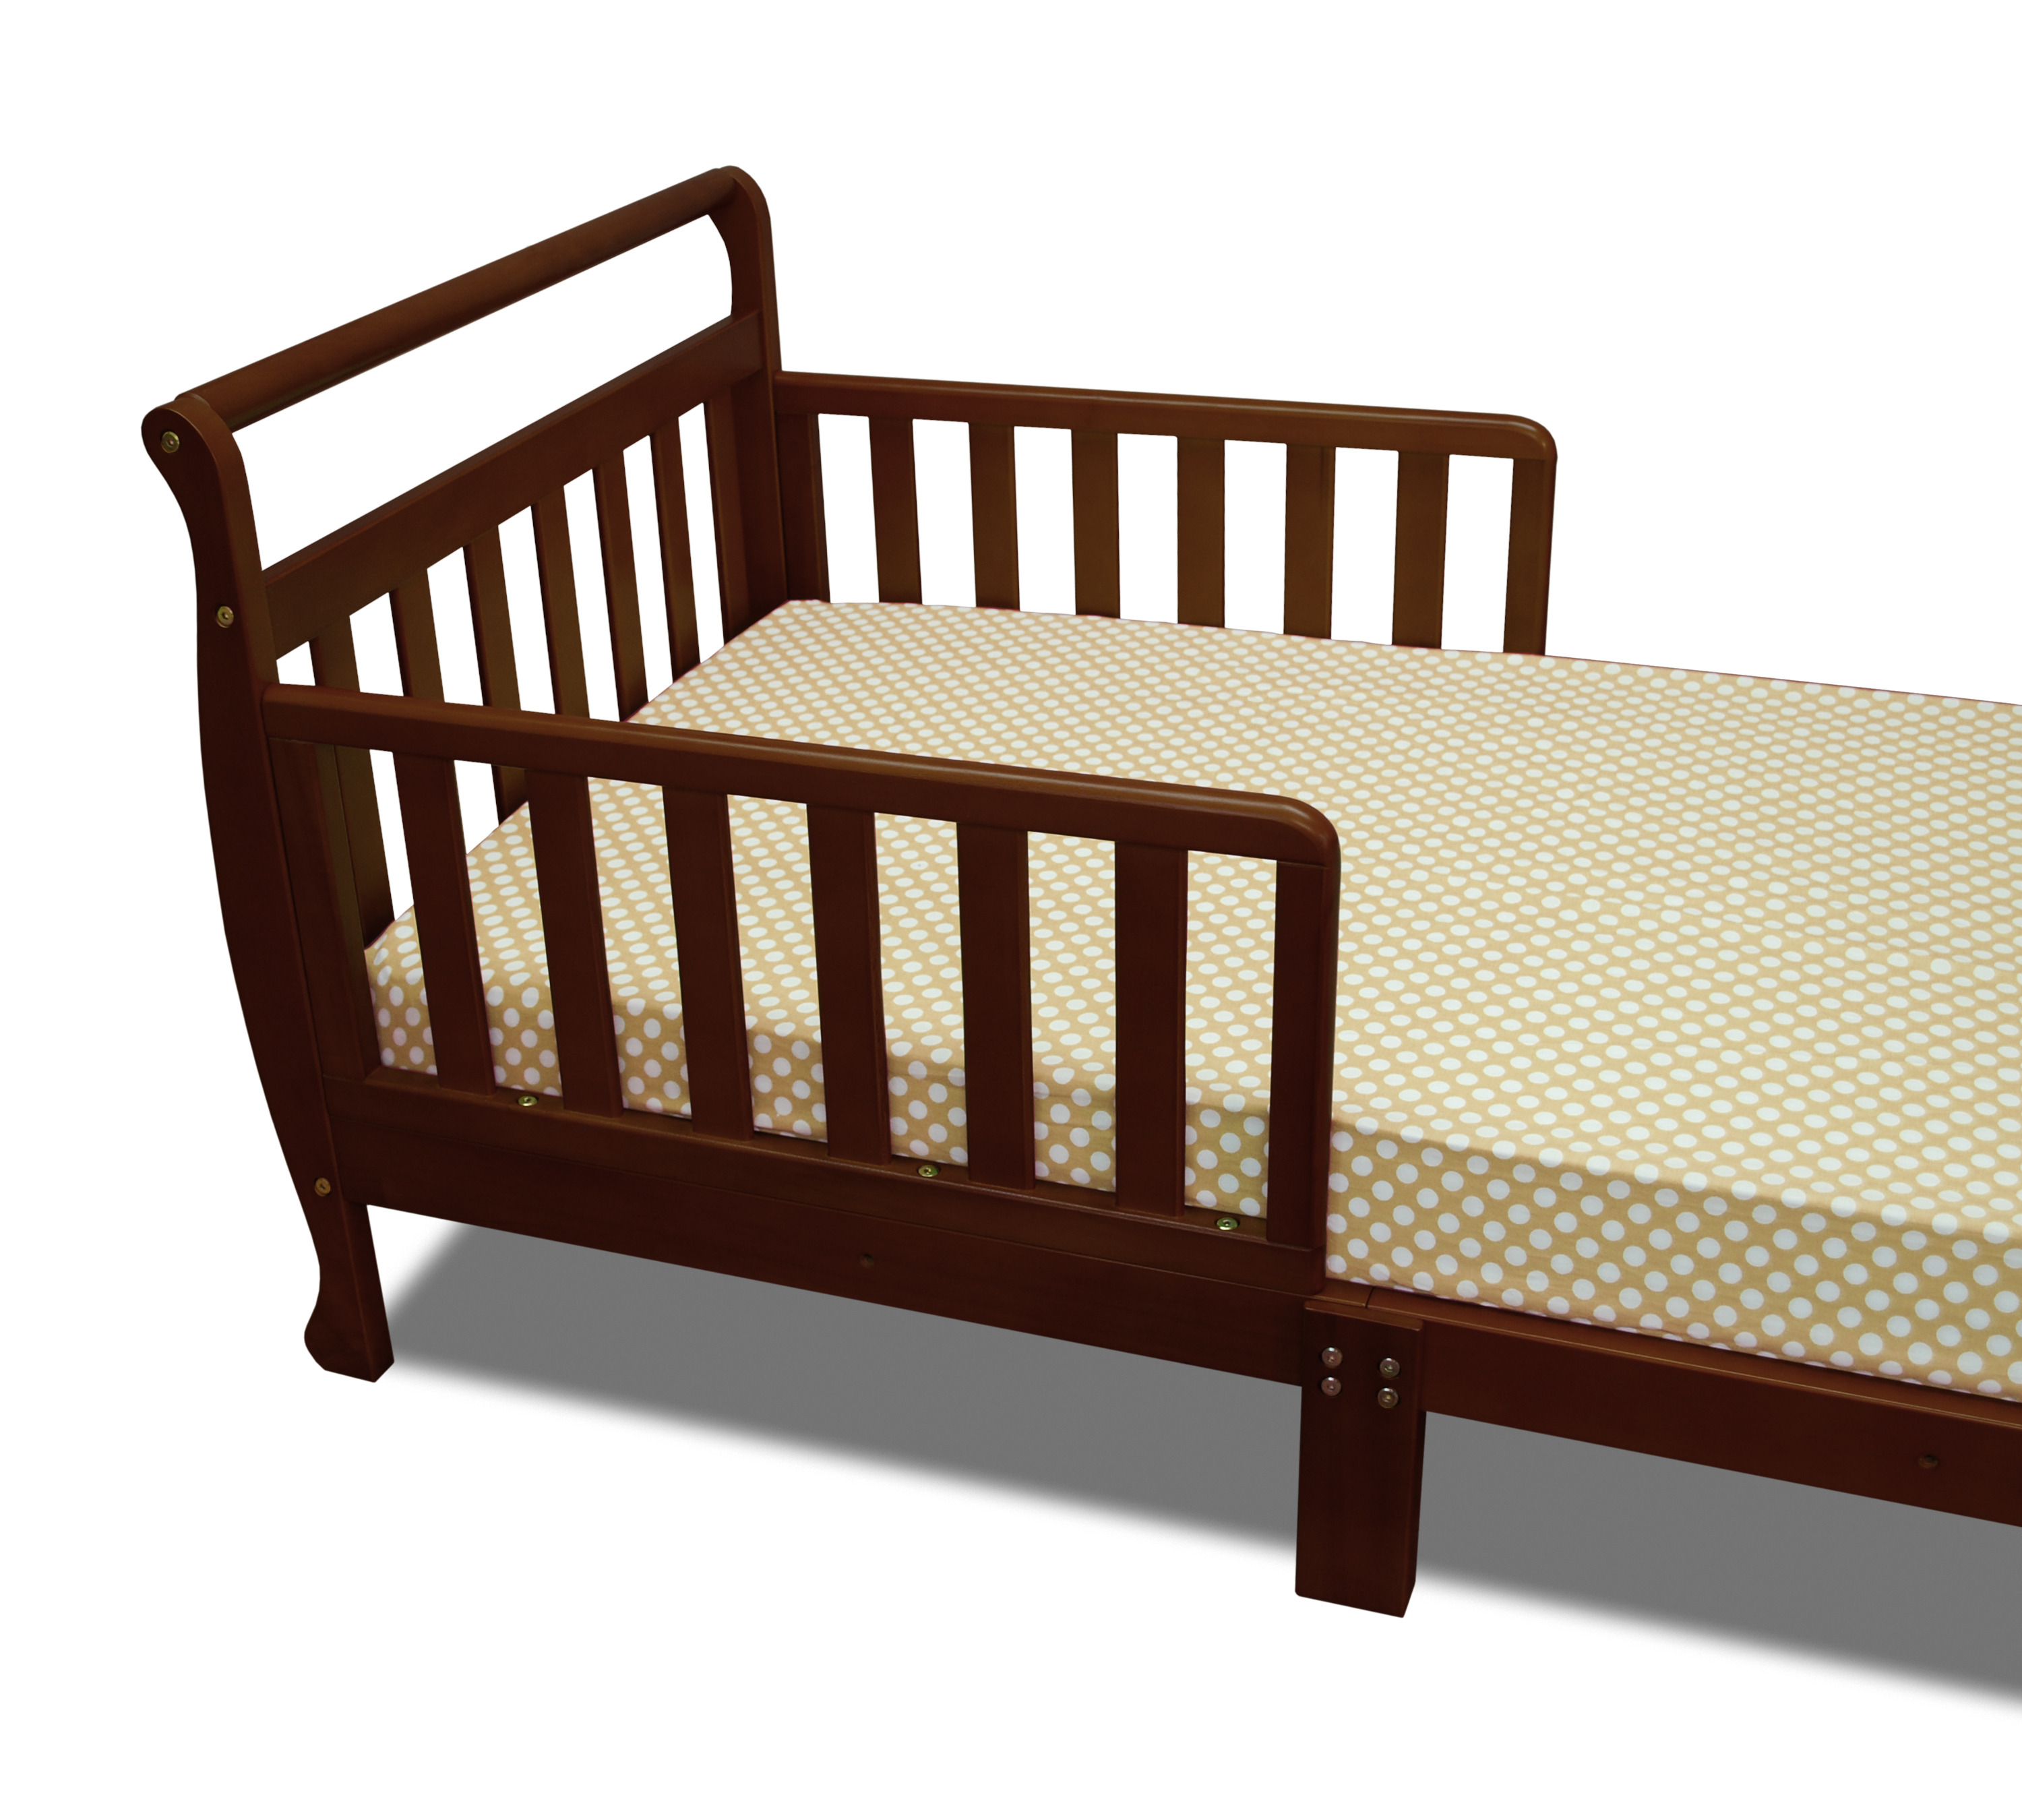 Athena Classic Sleigh Toddler Bed, Espresso - image 5 of 5